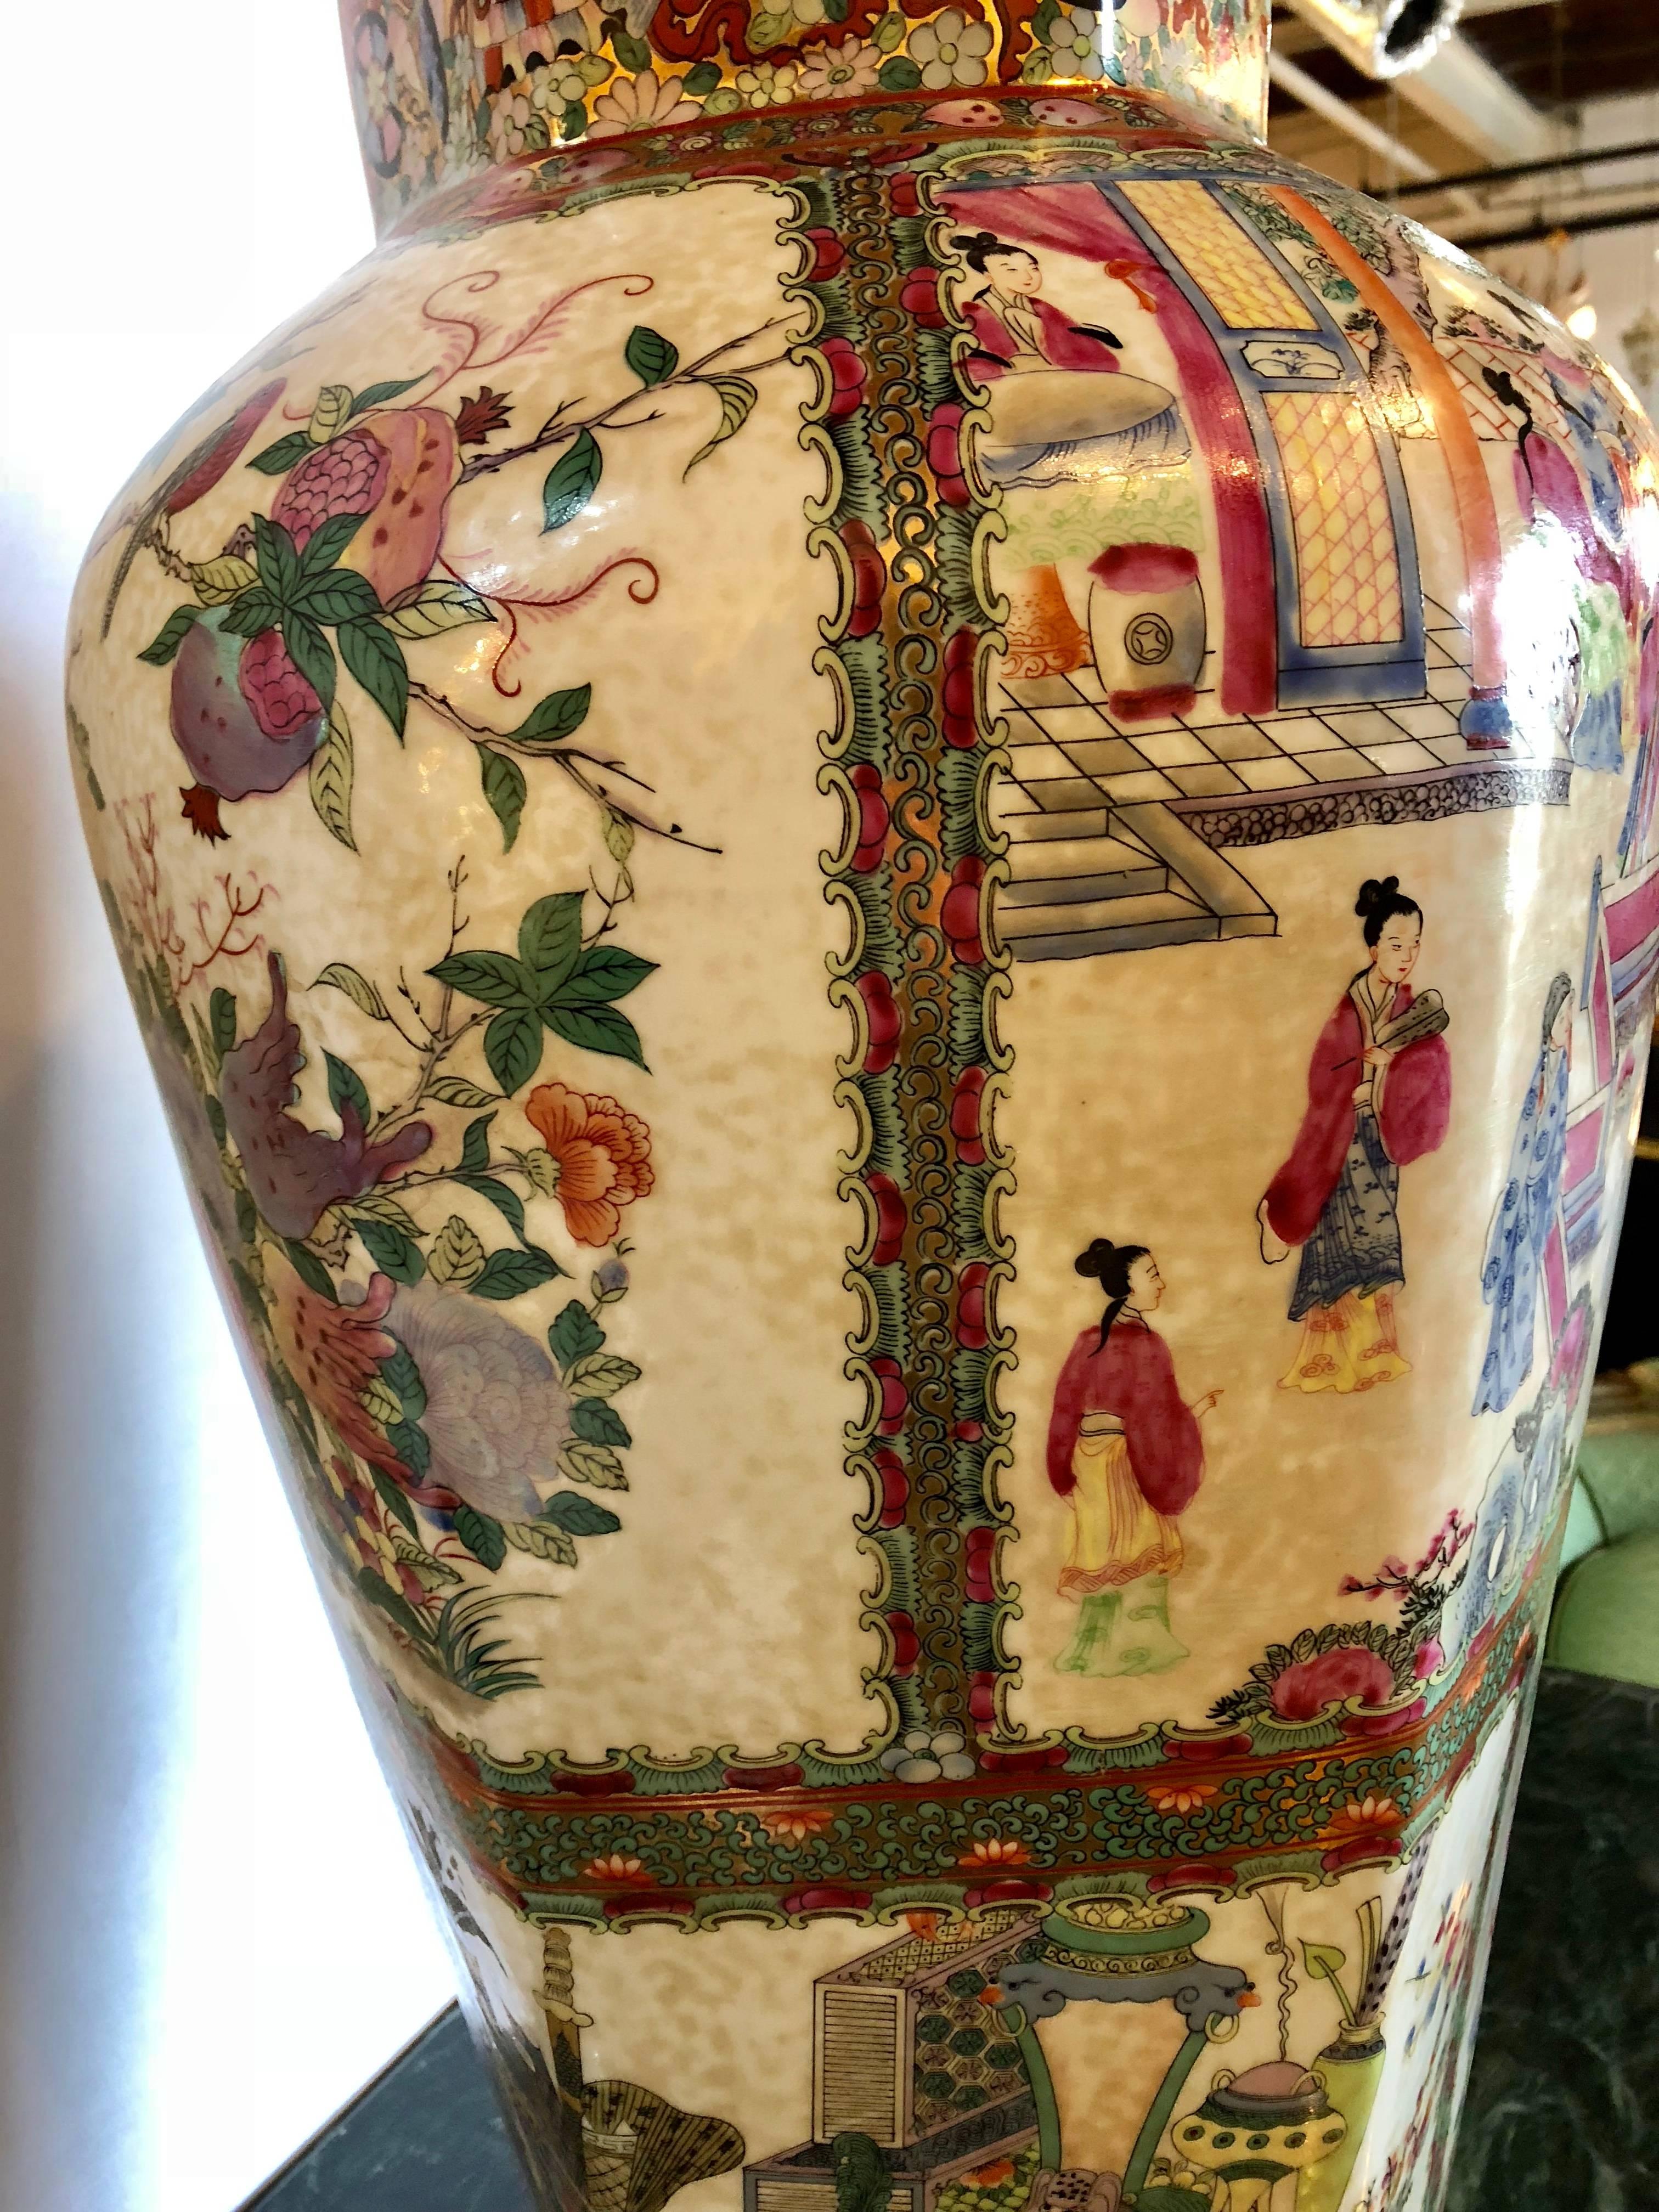 19th Century Rose Medellin Large Covered Jar Ching Dynasty 2